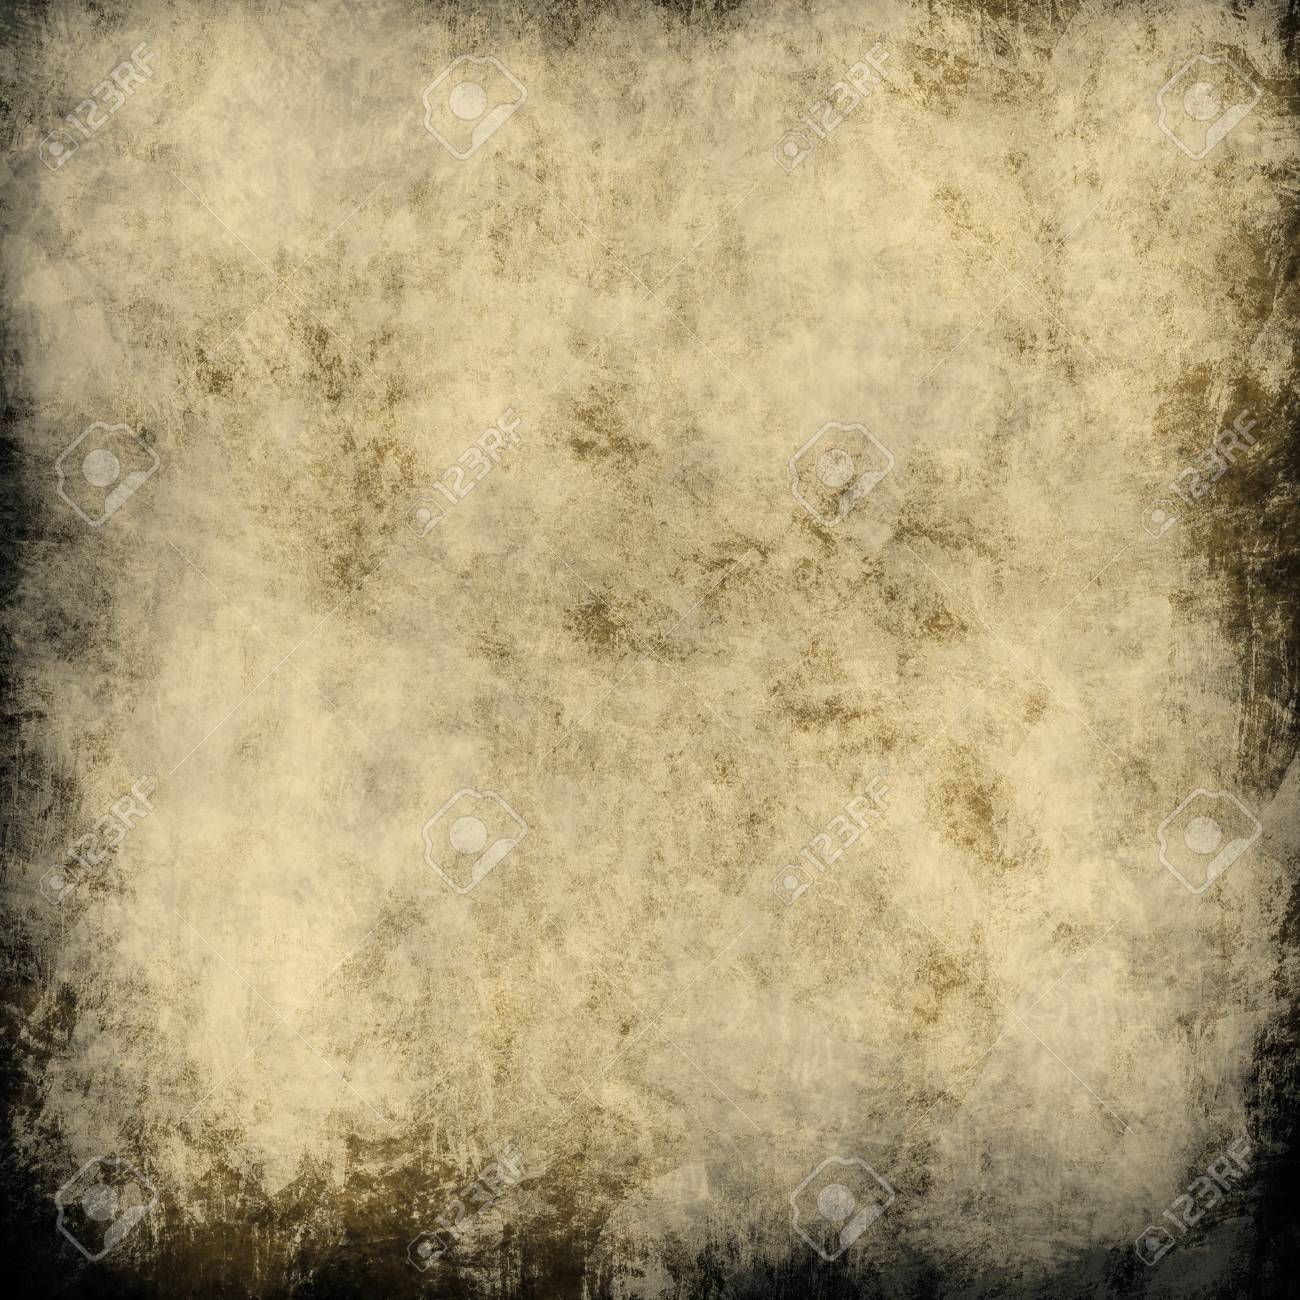 Gold Brown Background Paper With Vintage Grunge Texture